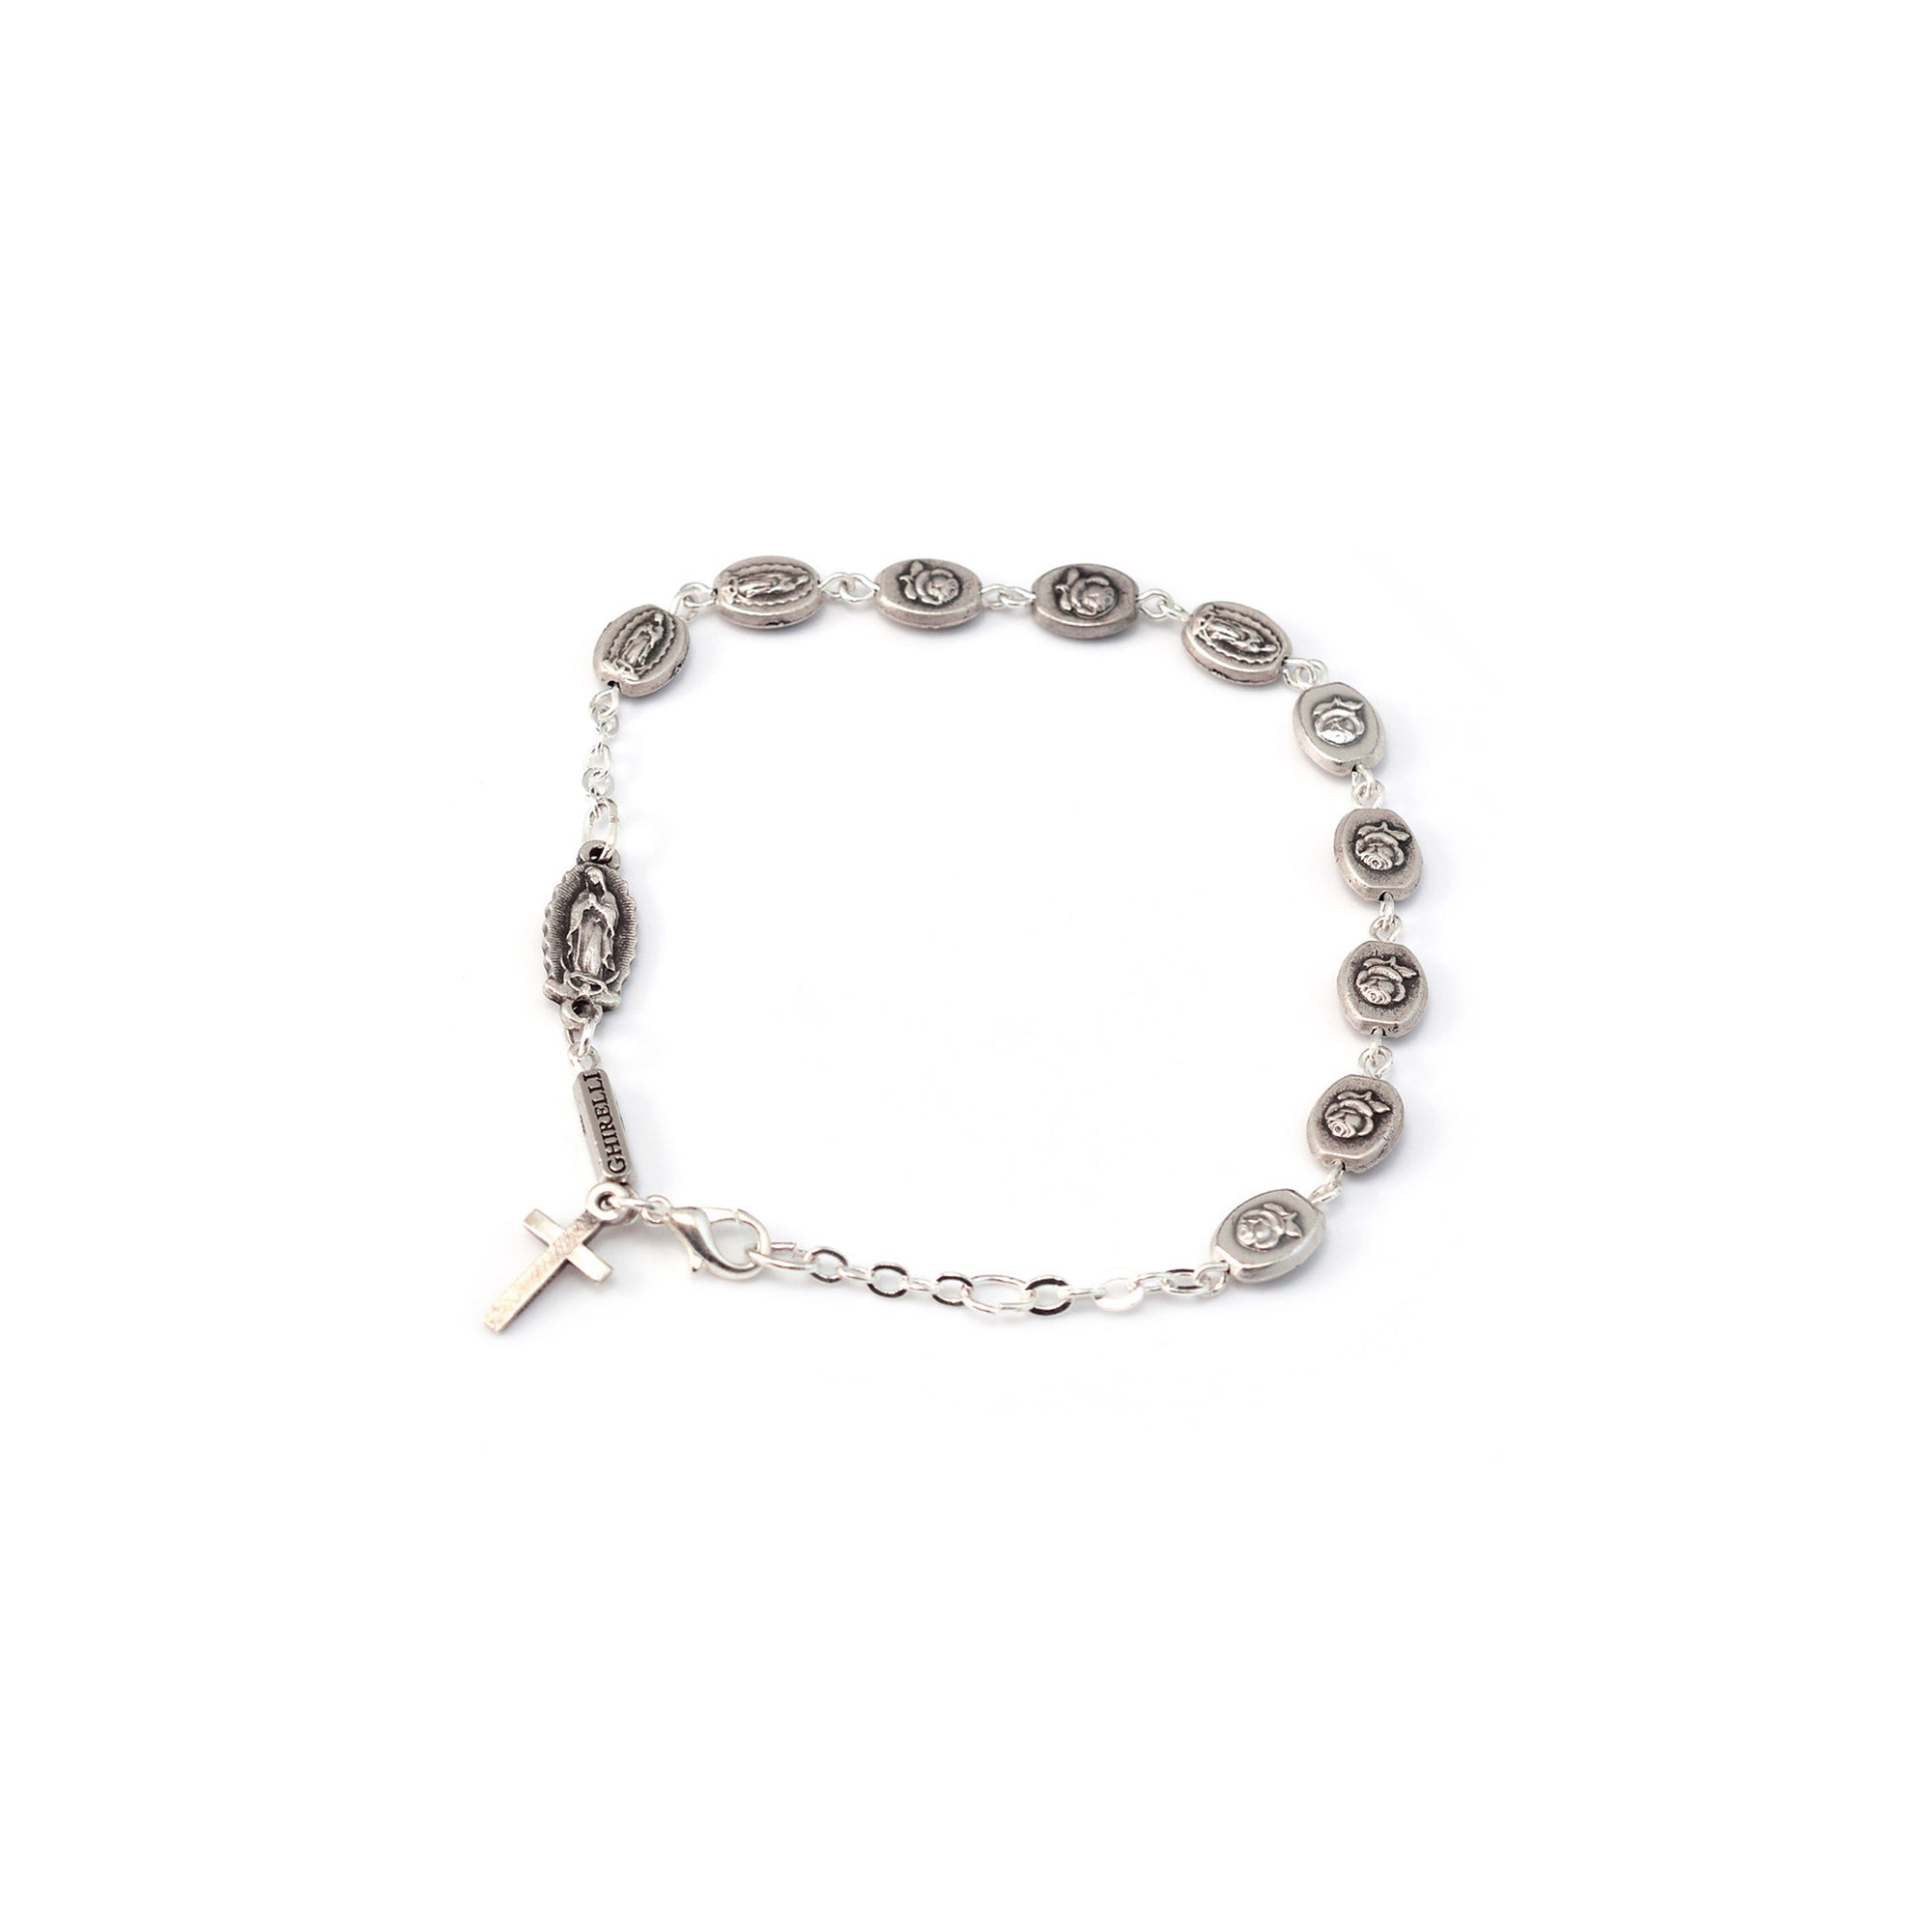 Our Lady of Guadalupe bracelet